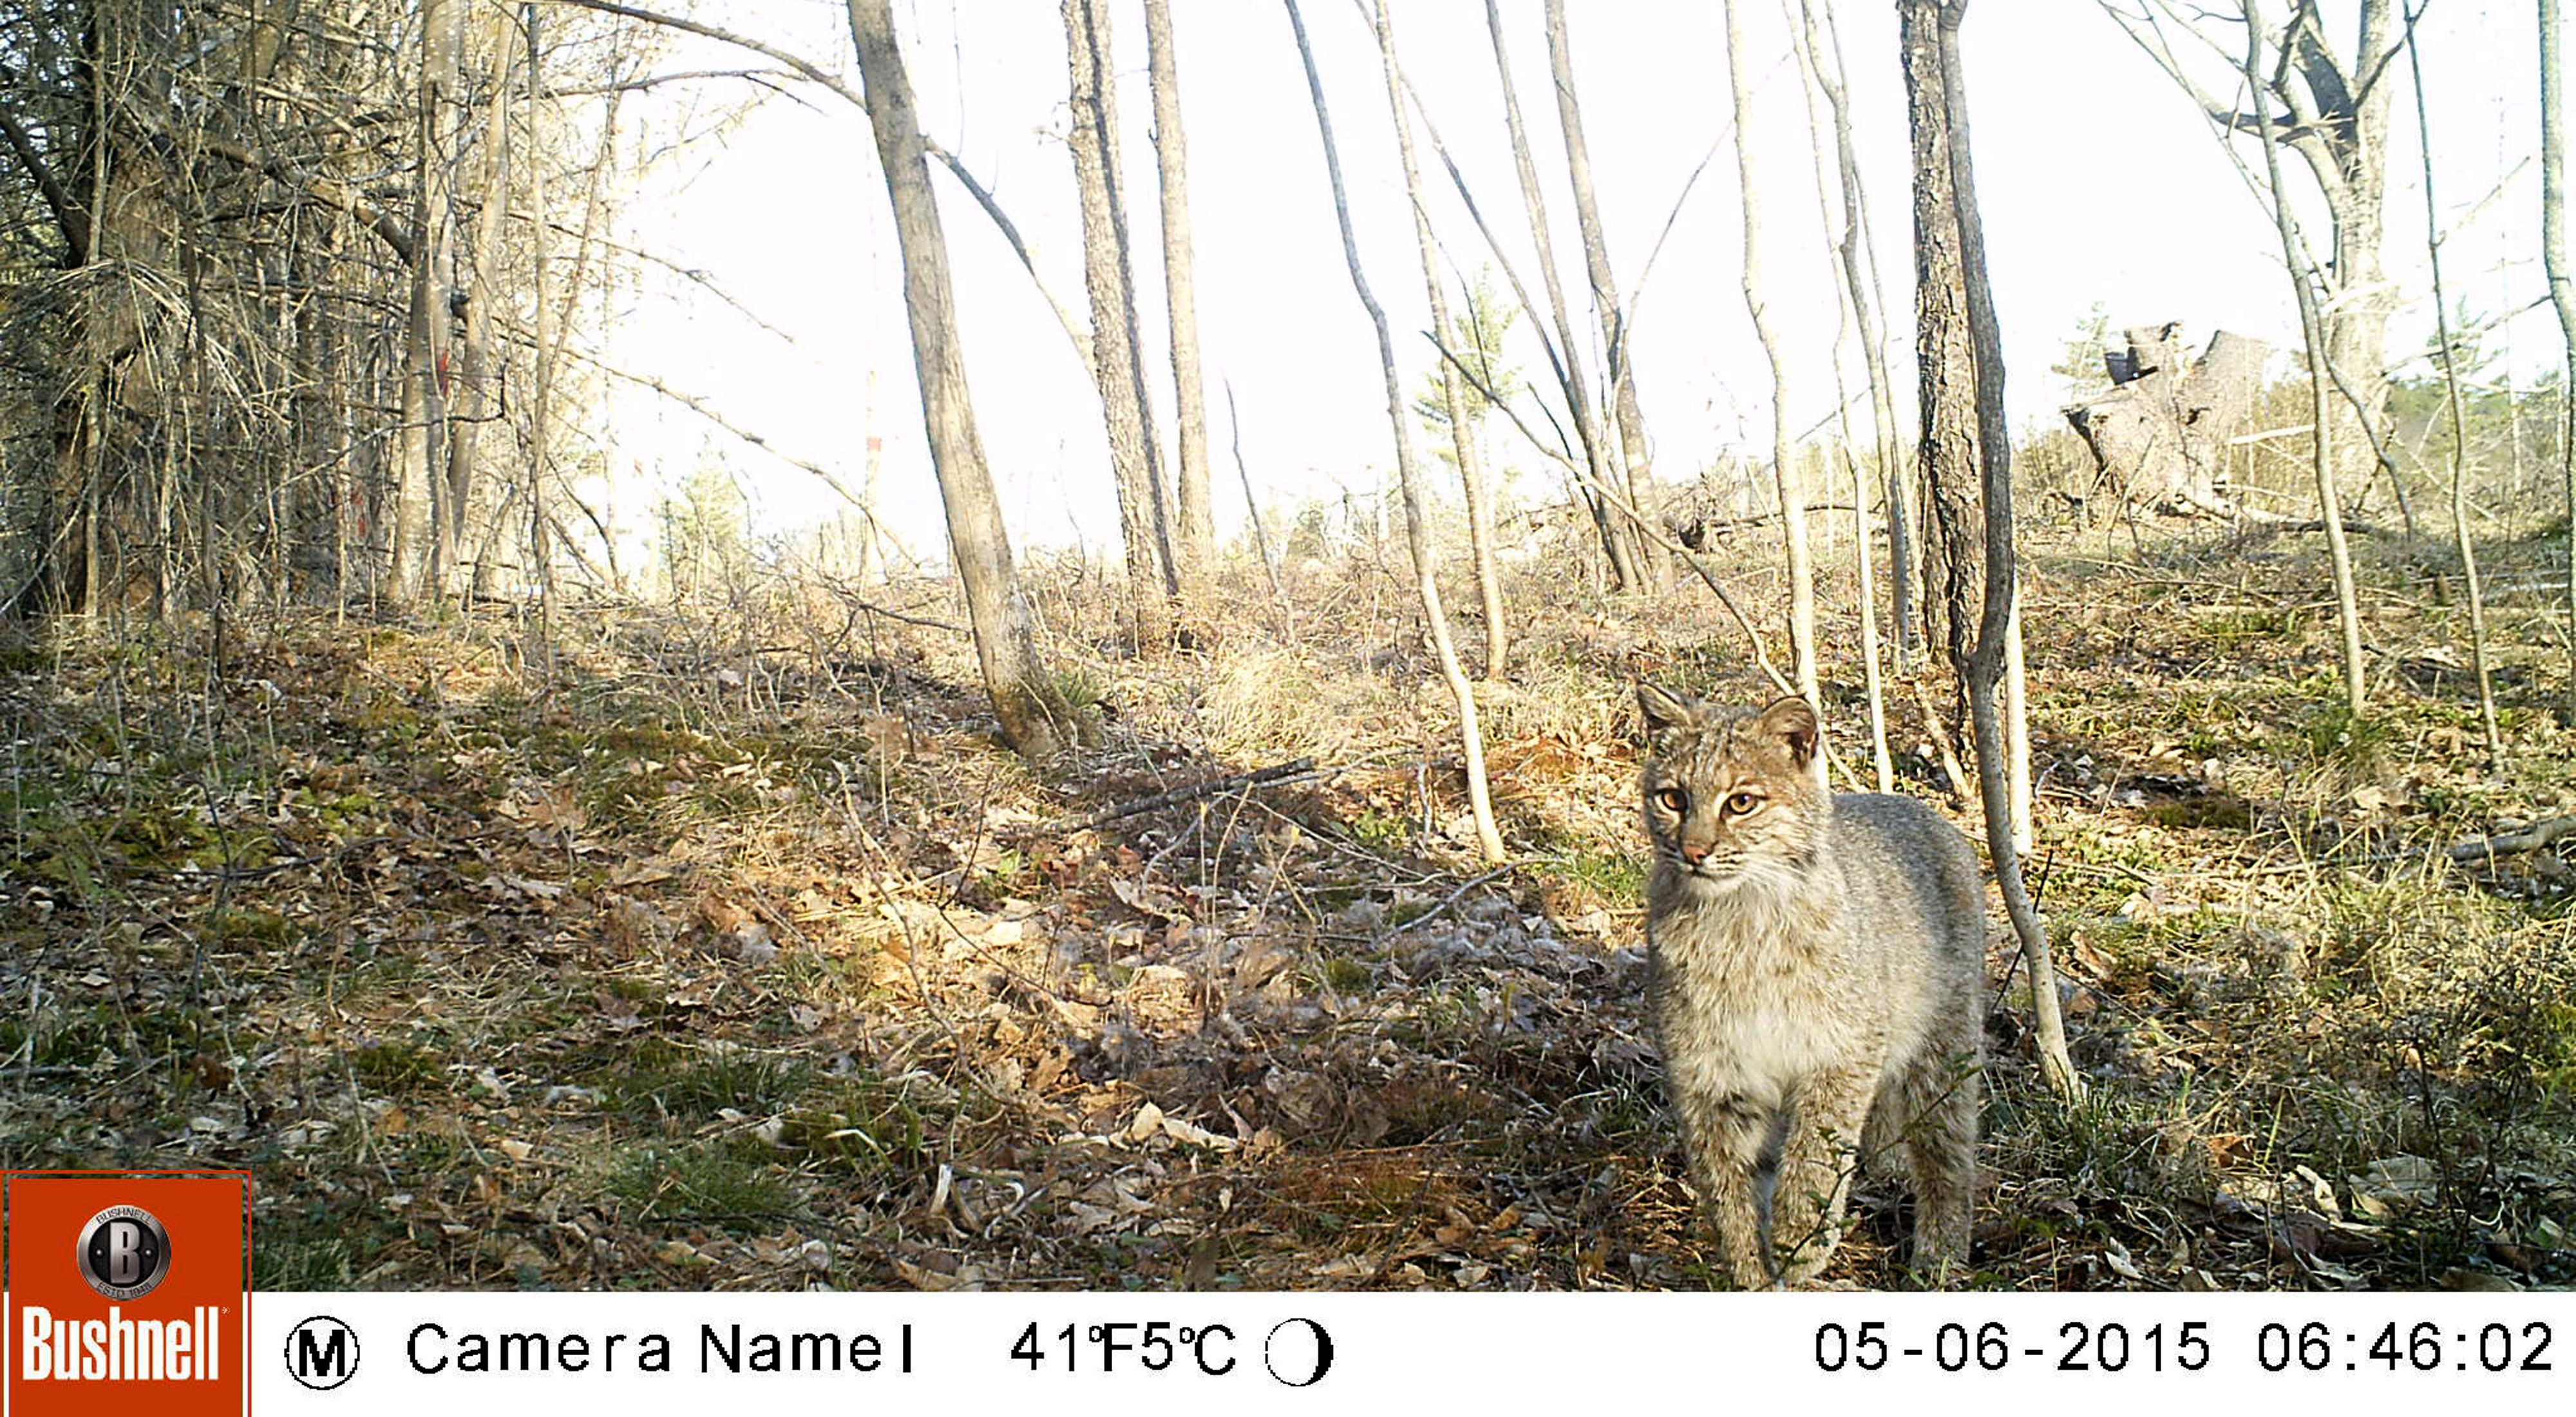 A bobcat caught on a trail camera in Hancock, New Hampshire